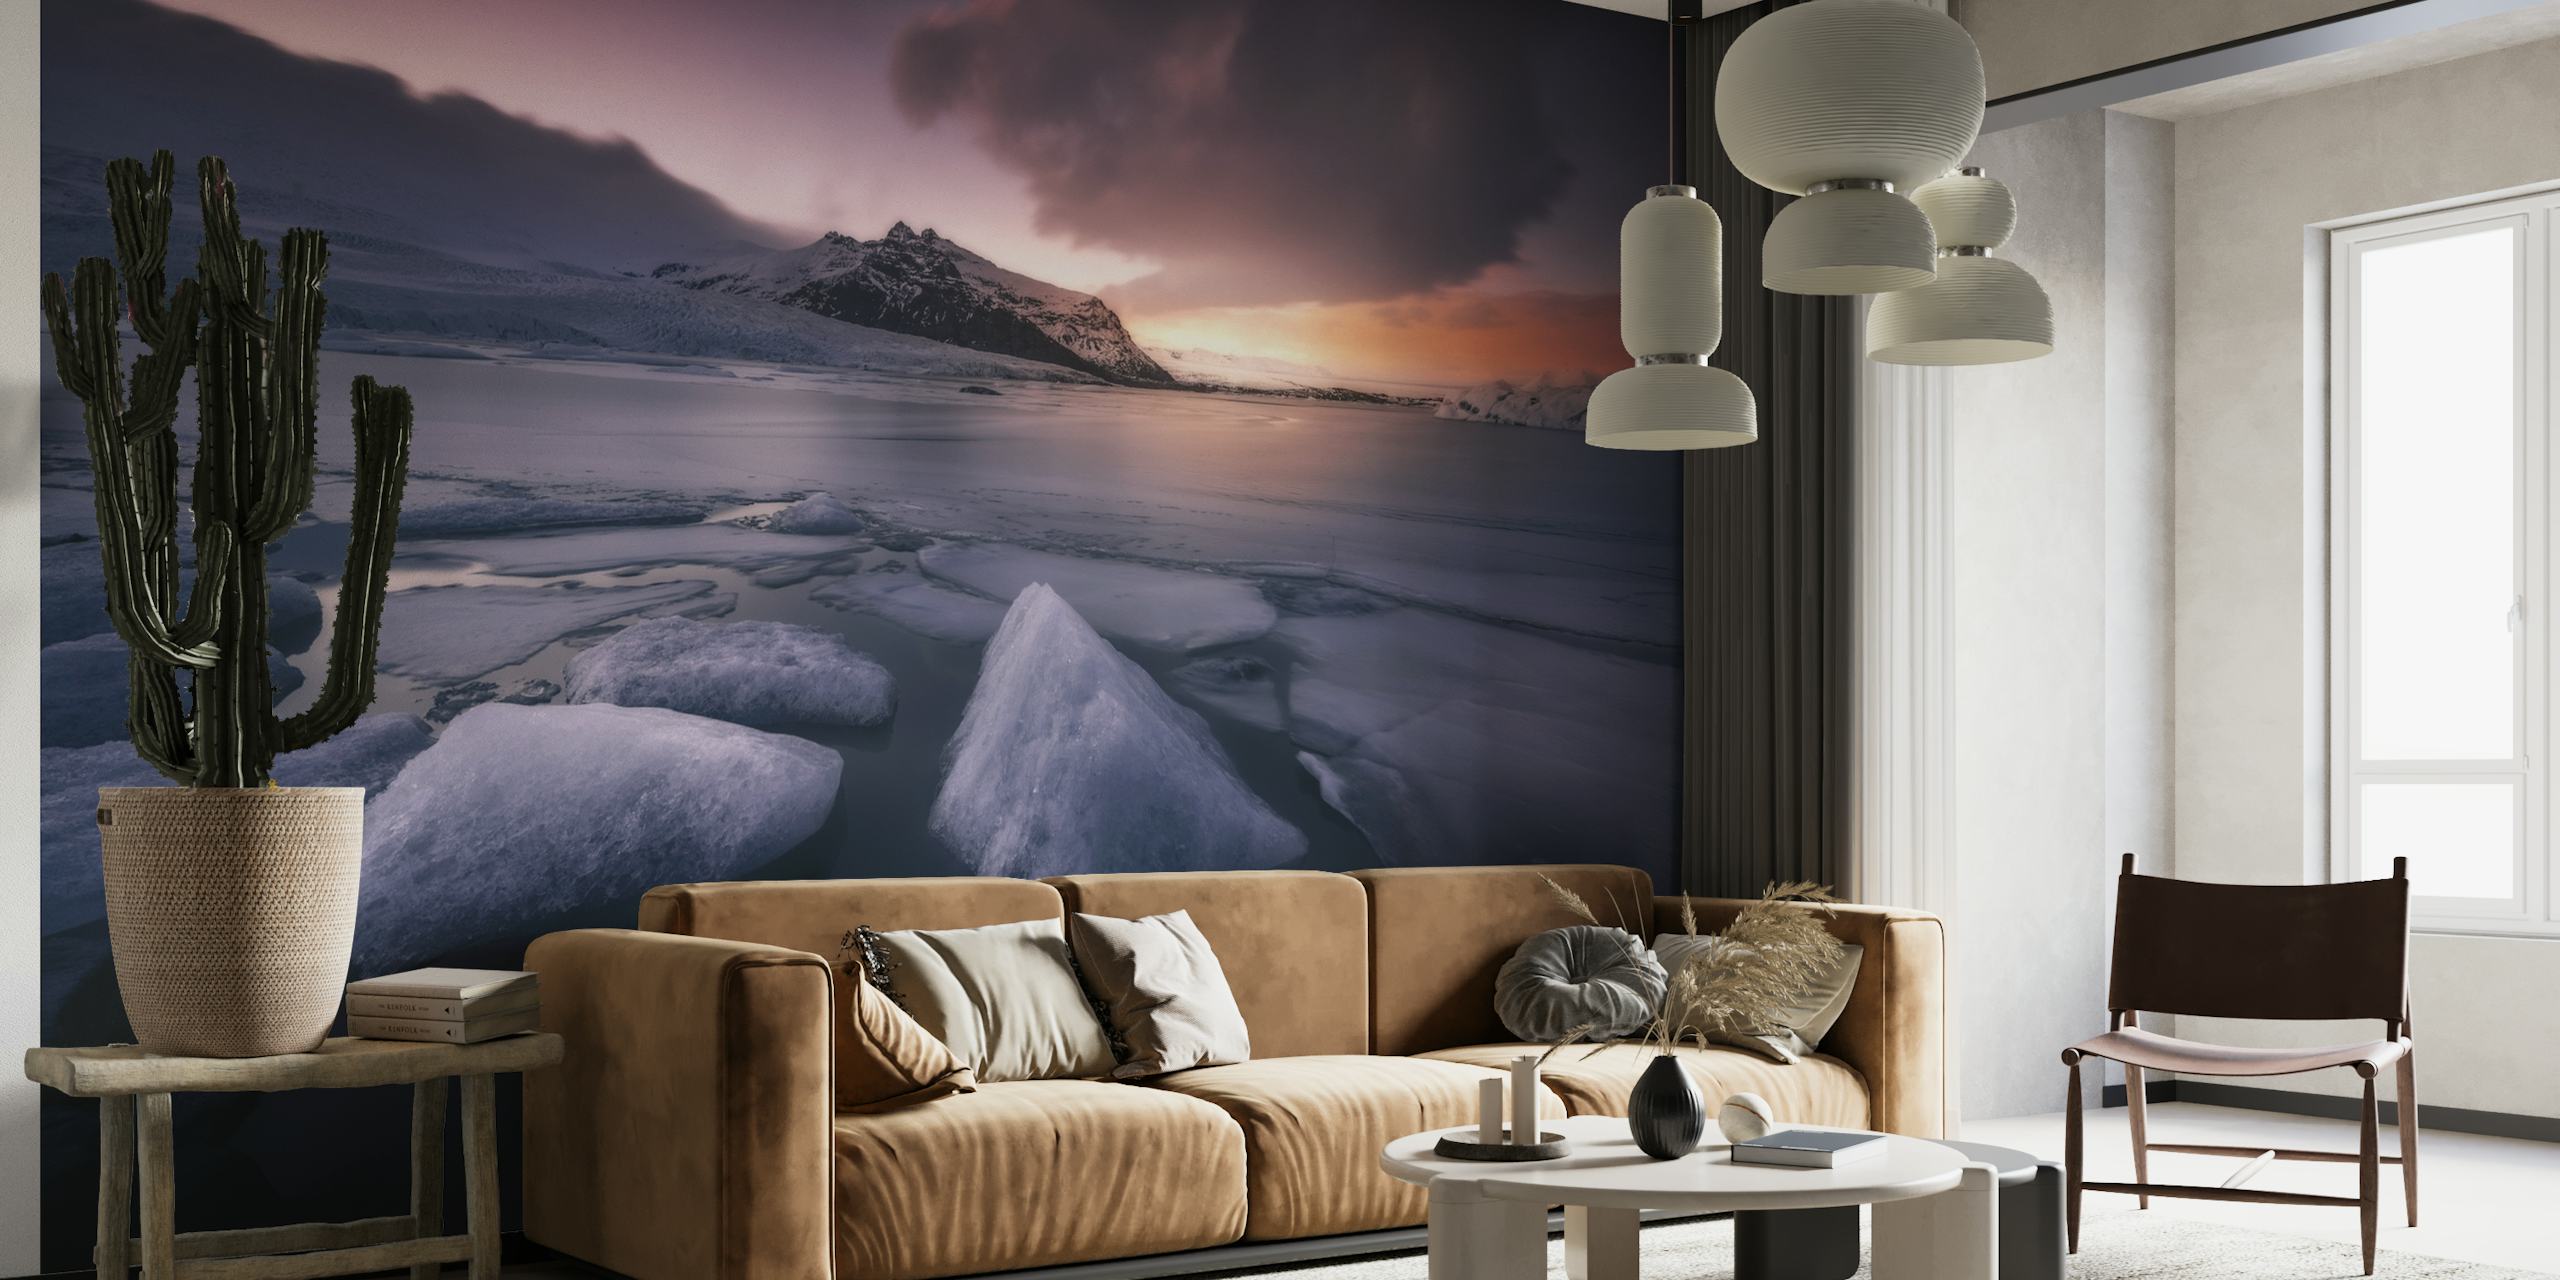 A wall mural depicting the Last Lights on Fjallsarlon lagoon with ice formations and a sunset over mountains.